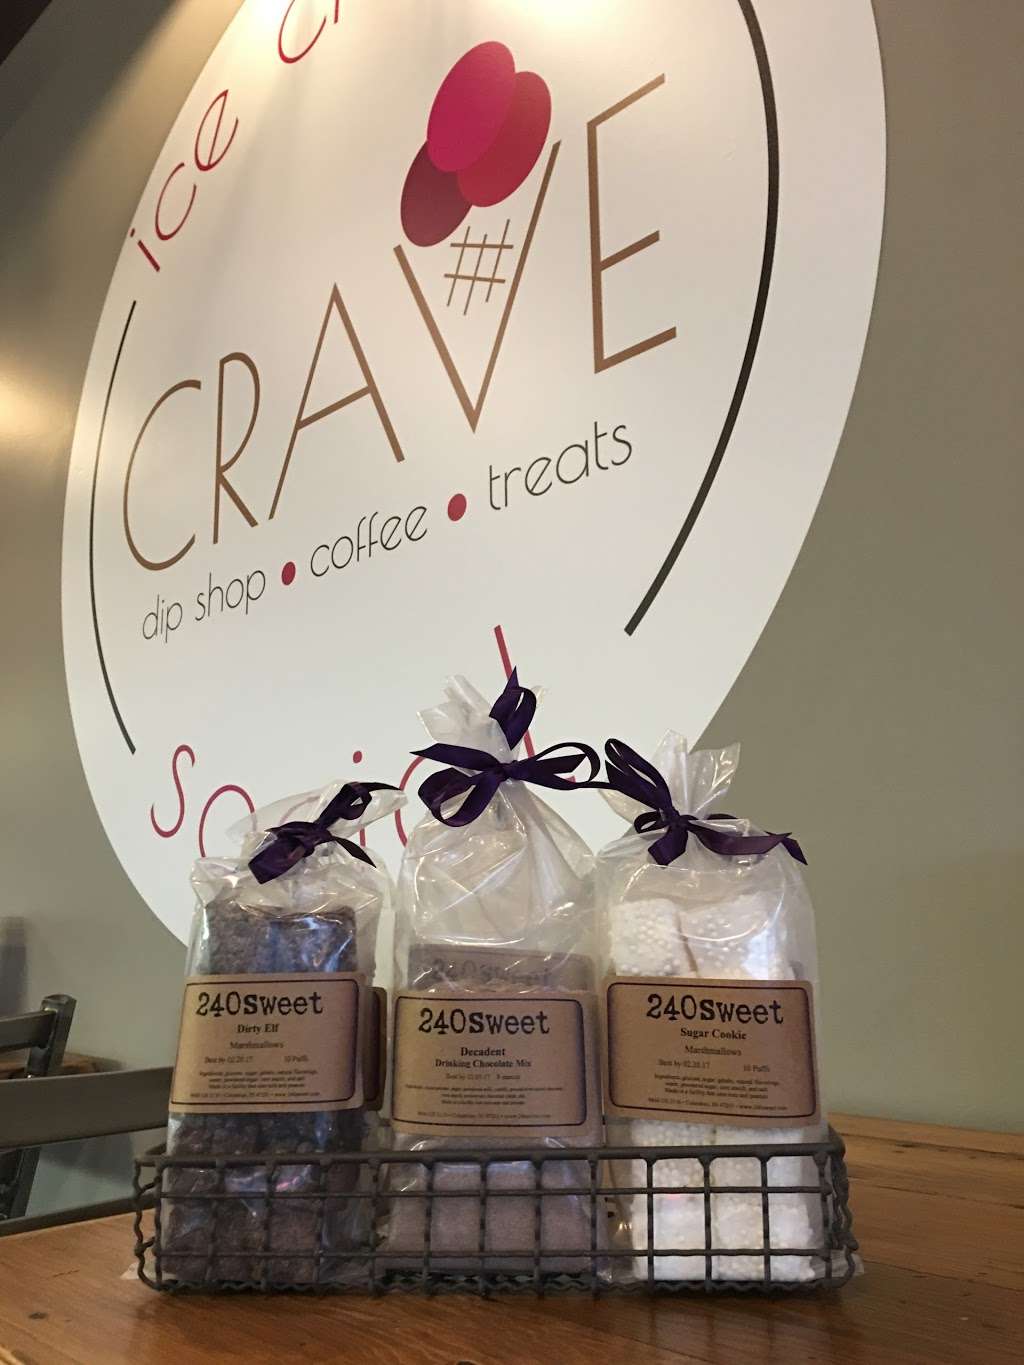 CRAVE Ice Cream Social | 11691 Fall Creek Rd #115, Indianapolis, IN 46256, USA | Phone: (317) 288-7791